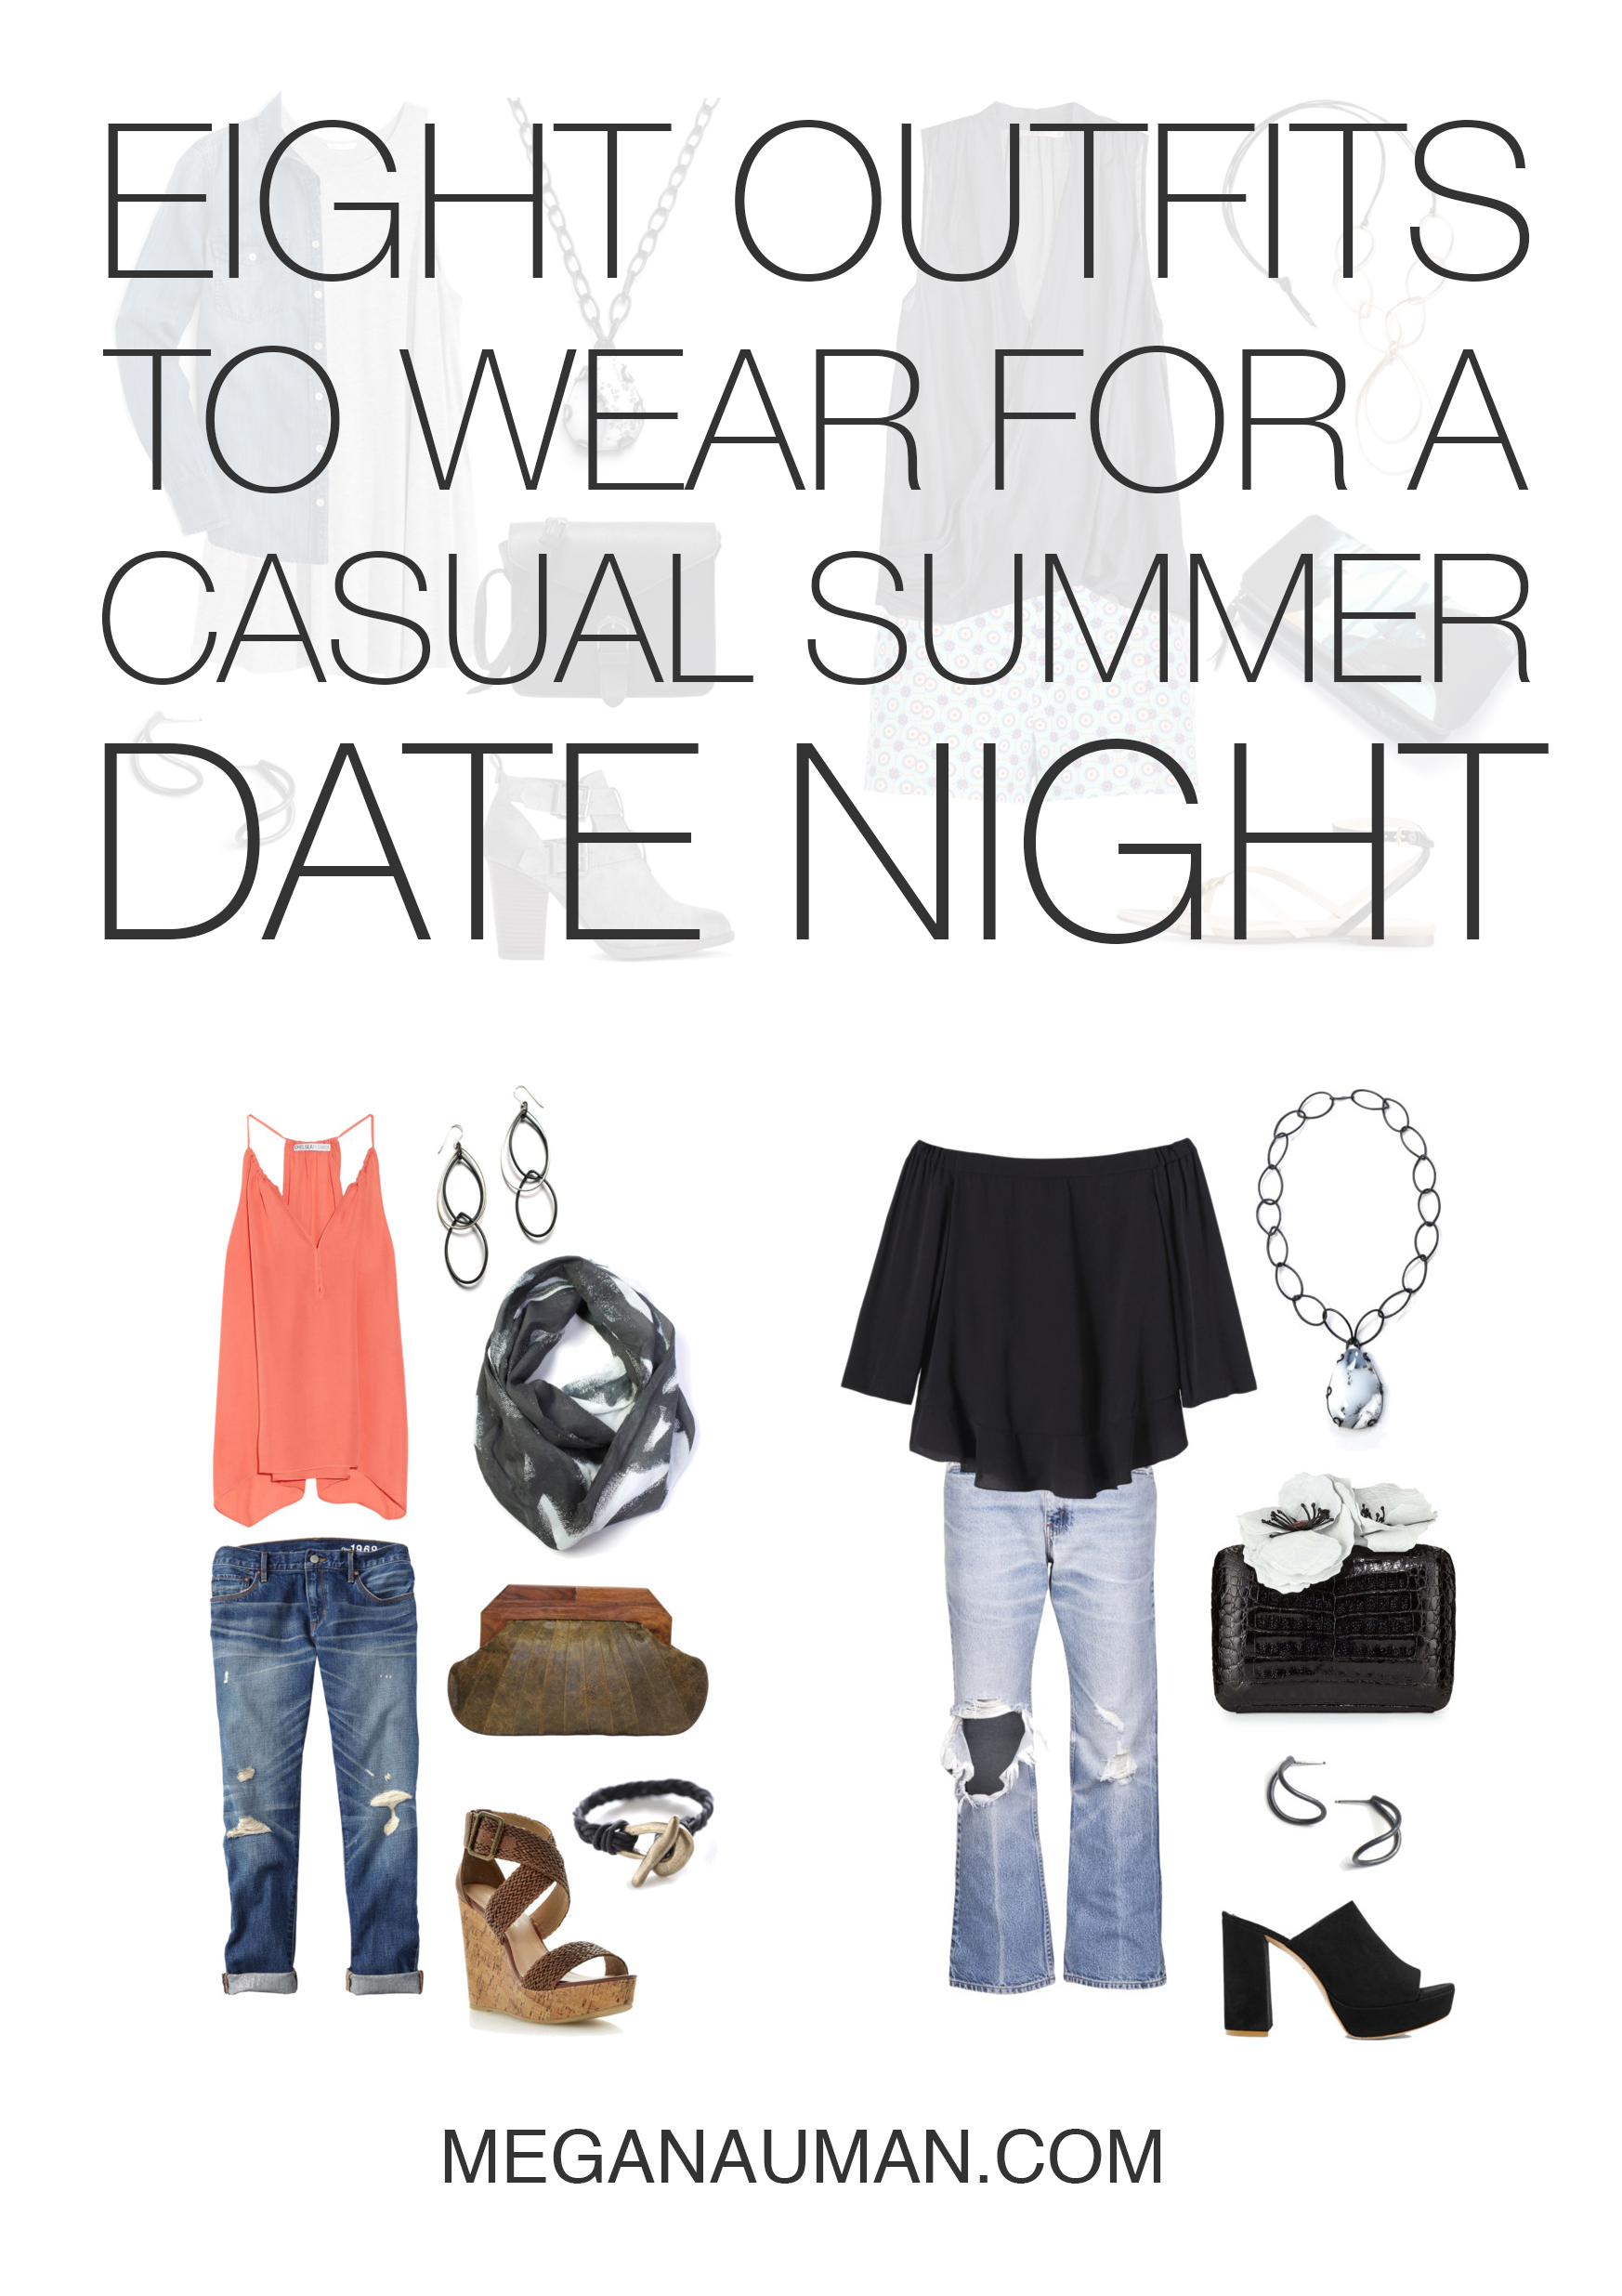 10 Fresh And Casual Date Night Outfit Ideas